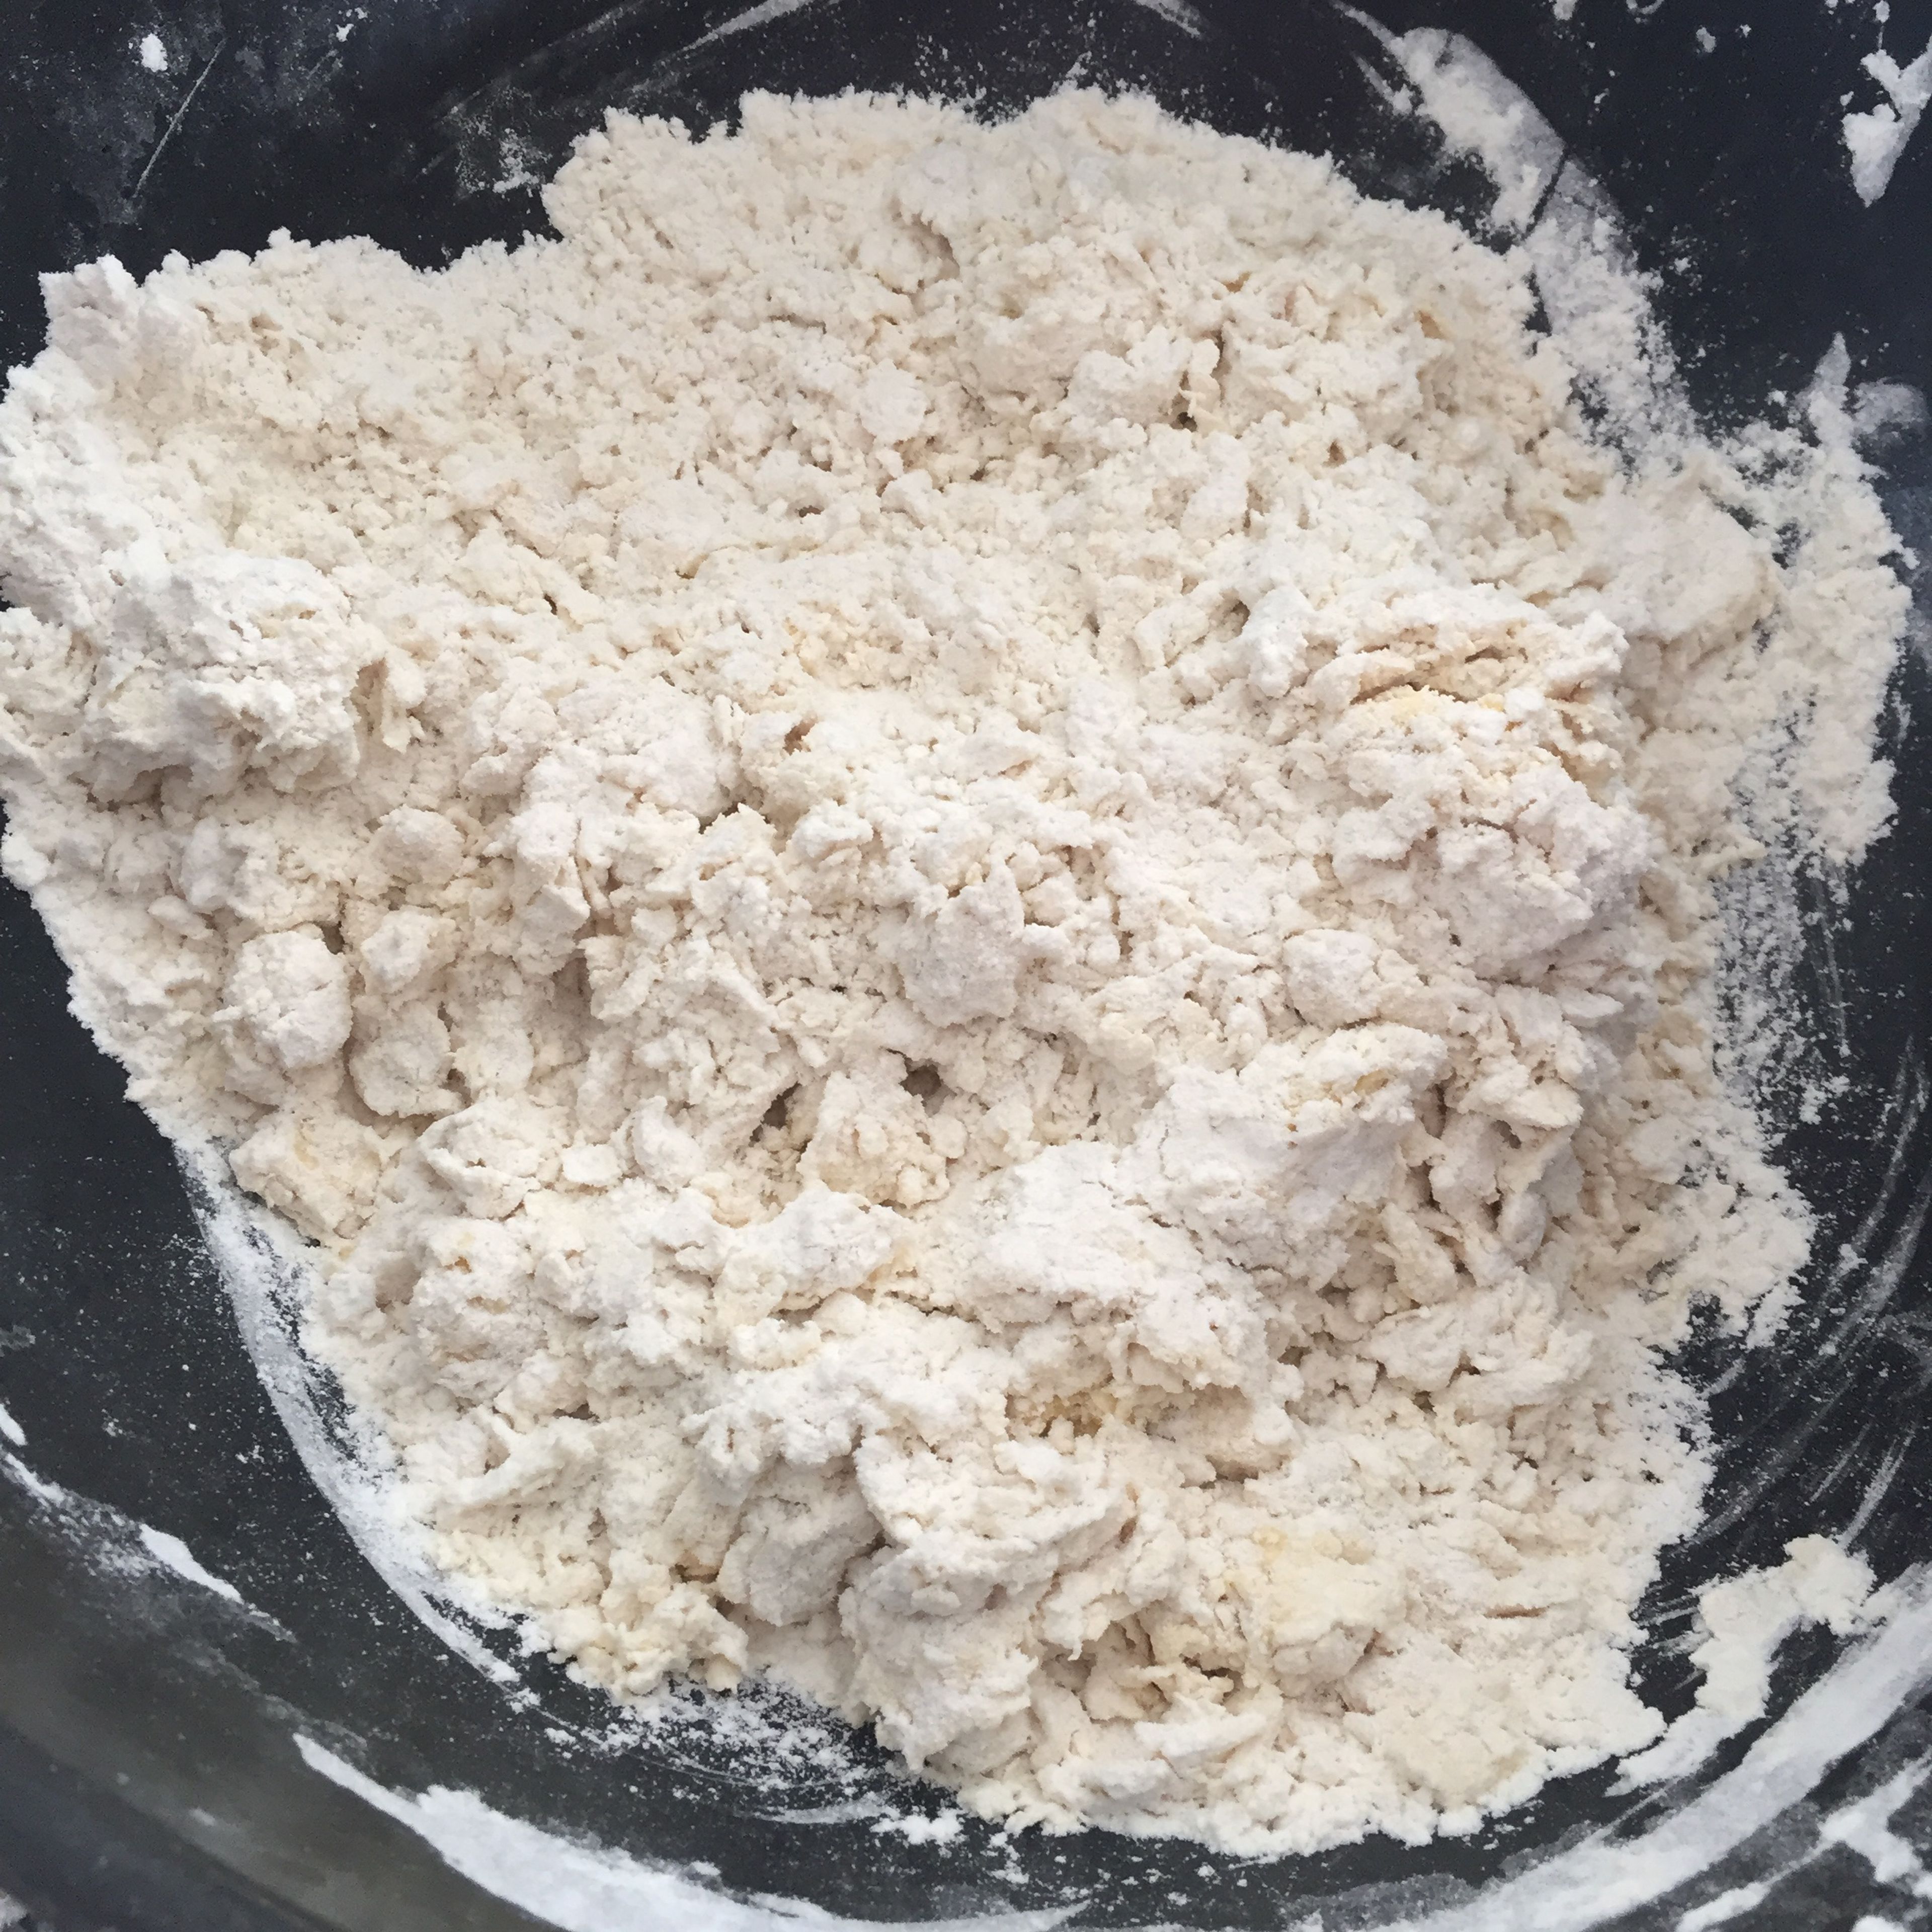 don’t worry if it seems too dry. Just knead until it forms a dough. Depending on the size of the eggs and on your flour, you might need to add a bit of water to make it come together. Just add a bit at a time, and knead. Kneading is key for a soft dough